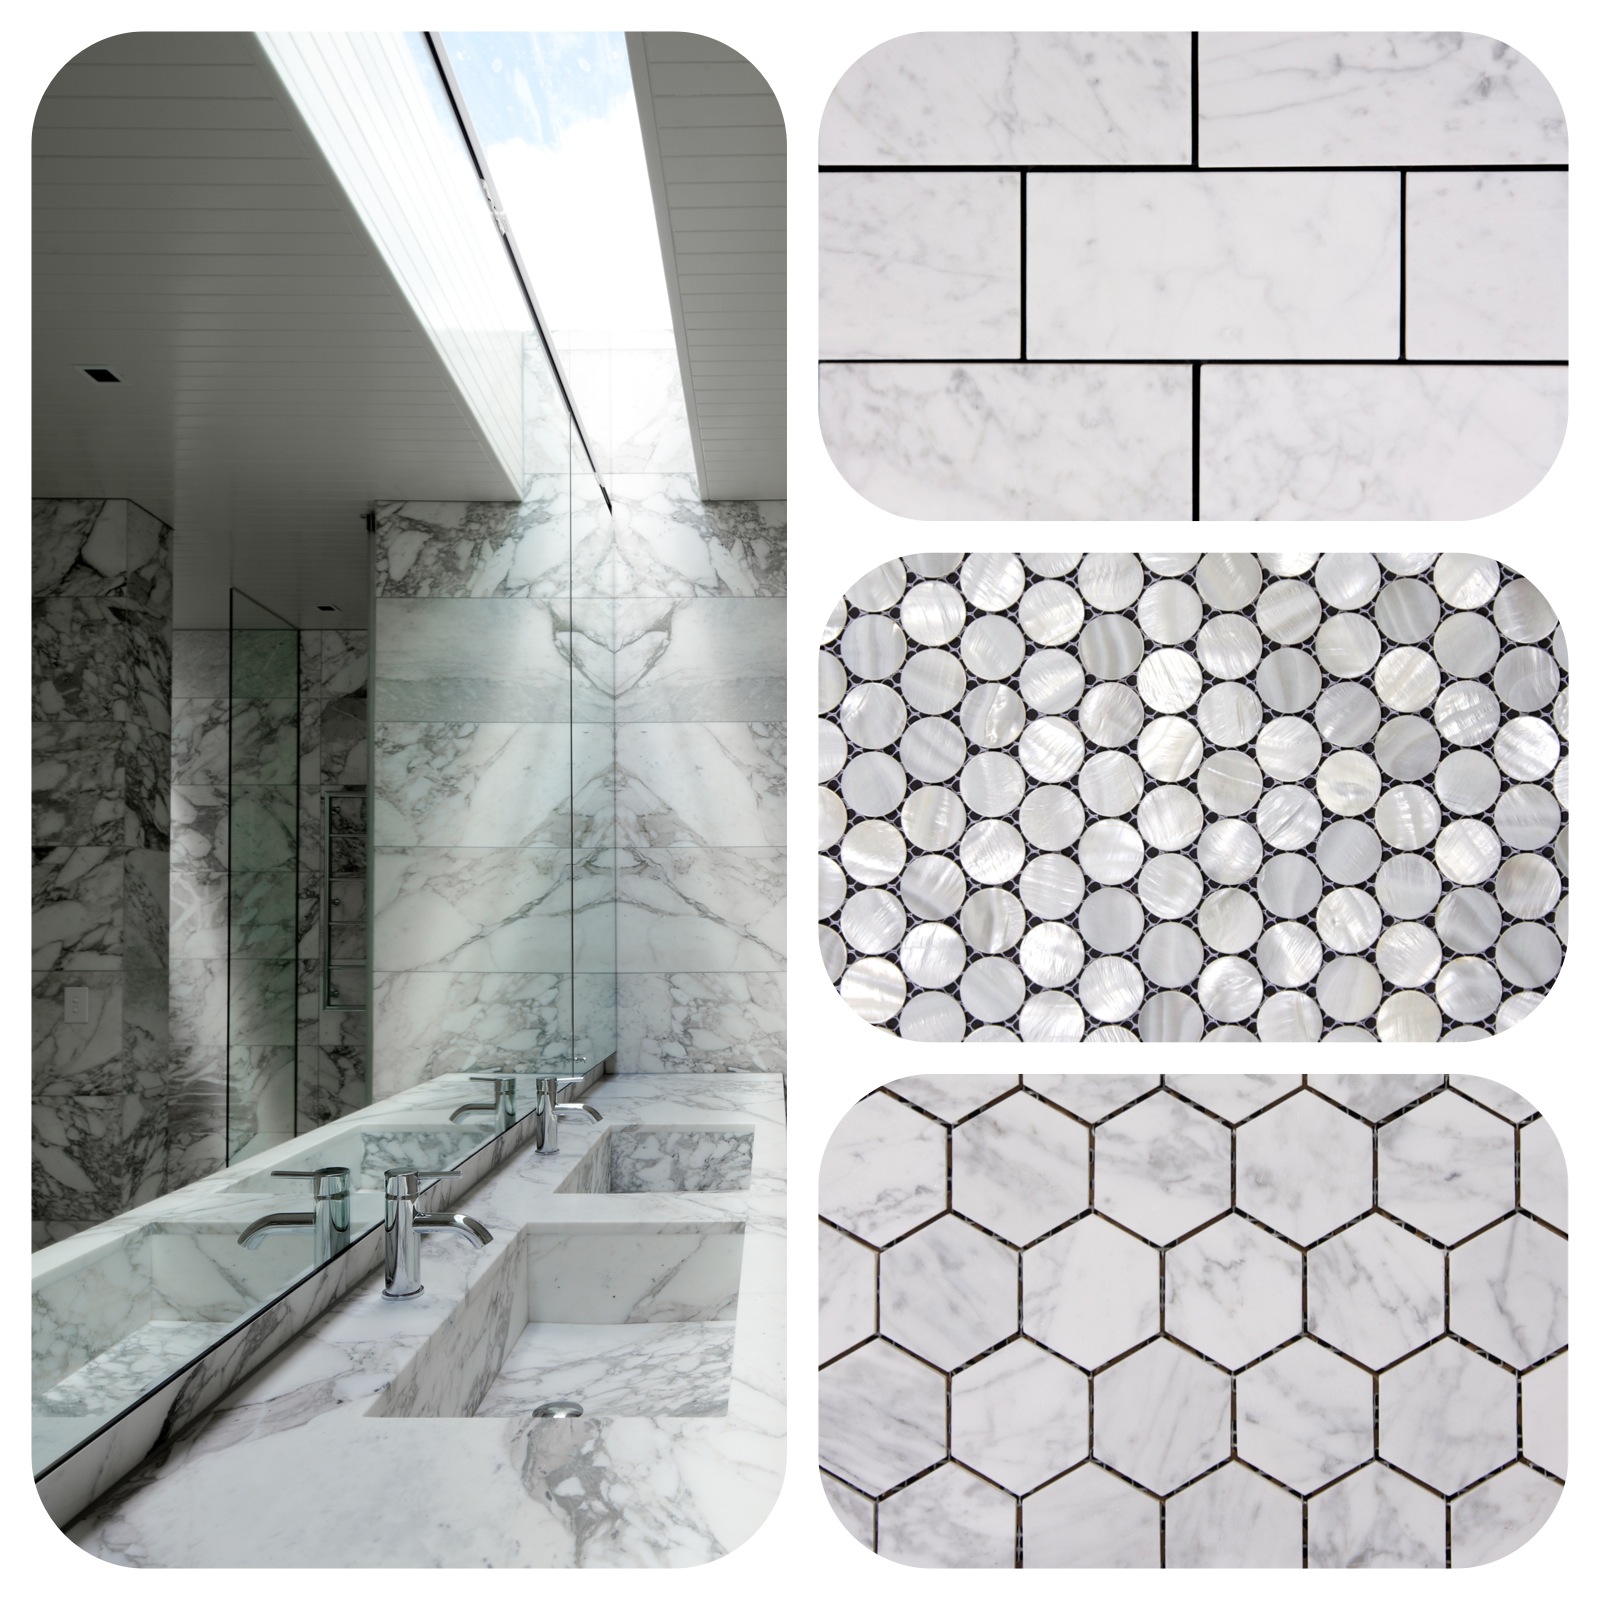 An Arabescato bathroom with marble and mother of pearl mosaics